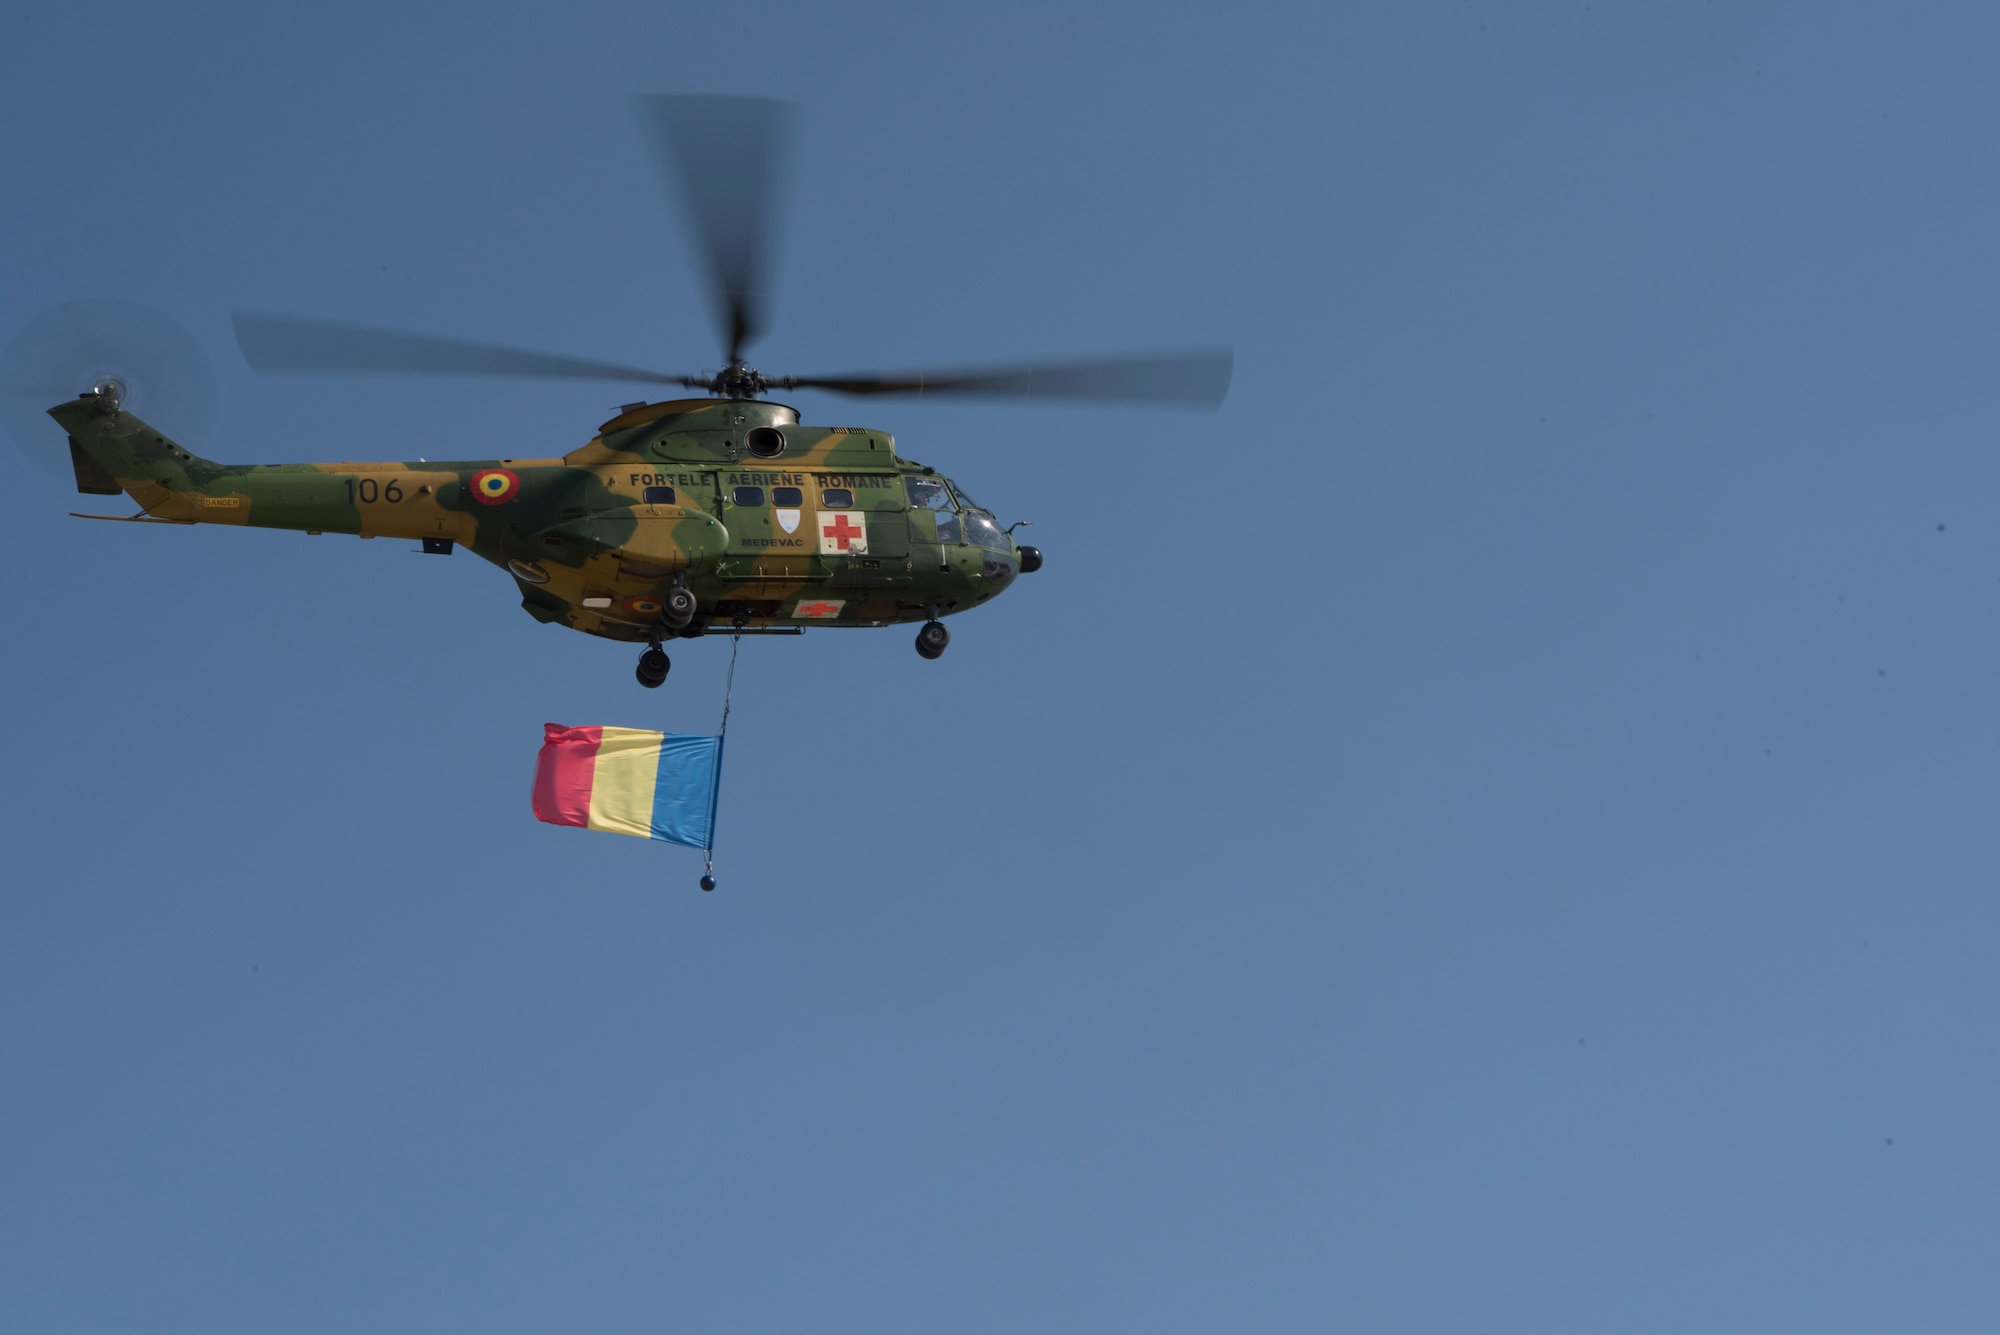 A Romanian air force paramedic helicopter returns from an air show held near Otopeni Air Base, Romania, Aug. 24, 2019. The air show, occurring at the same time as exercise Carpathian Fall, required a lot of time and resources from the Romanian air force. (U.S. Air Force photo by Senior Airman Kristof J. Rixmann)